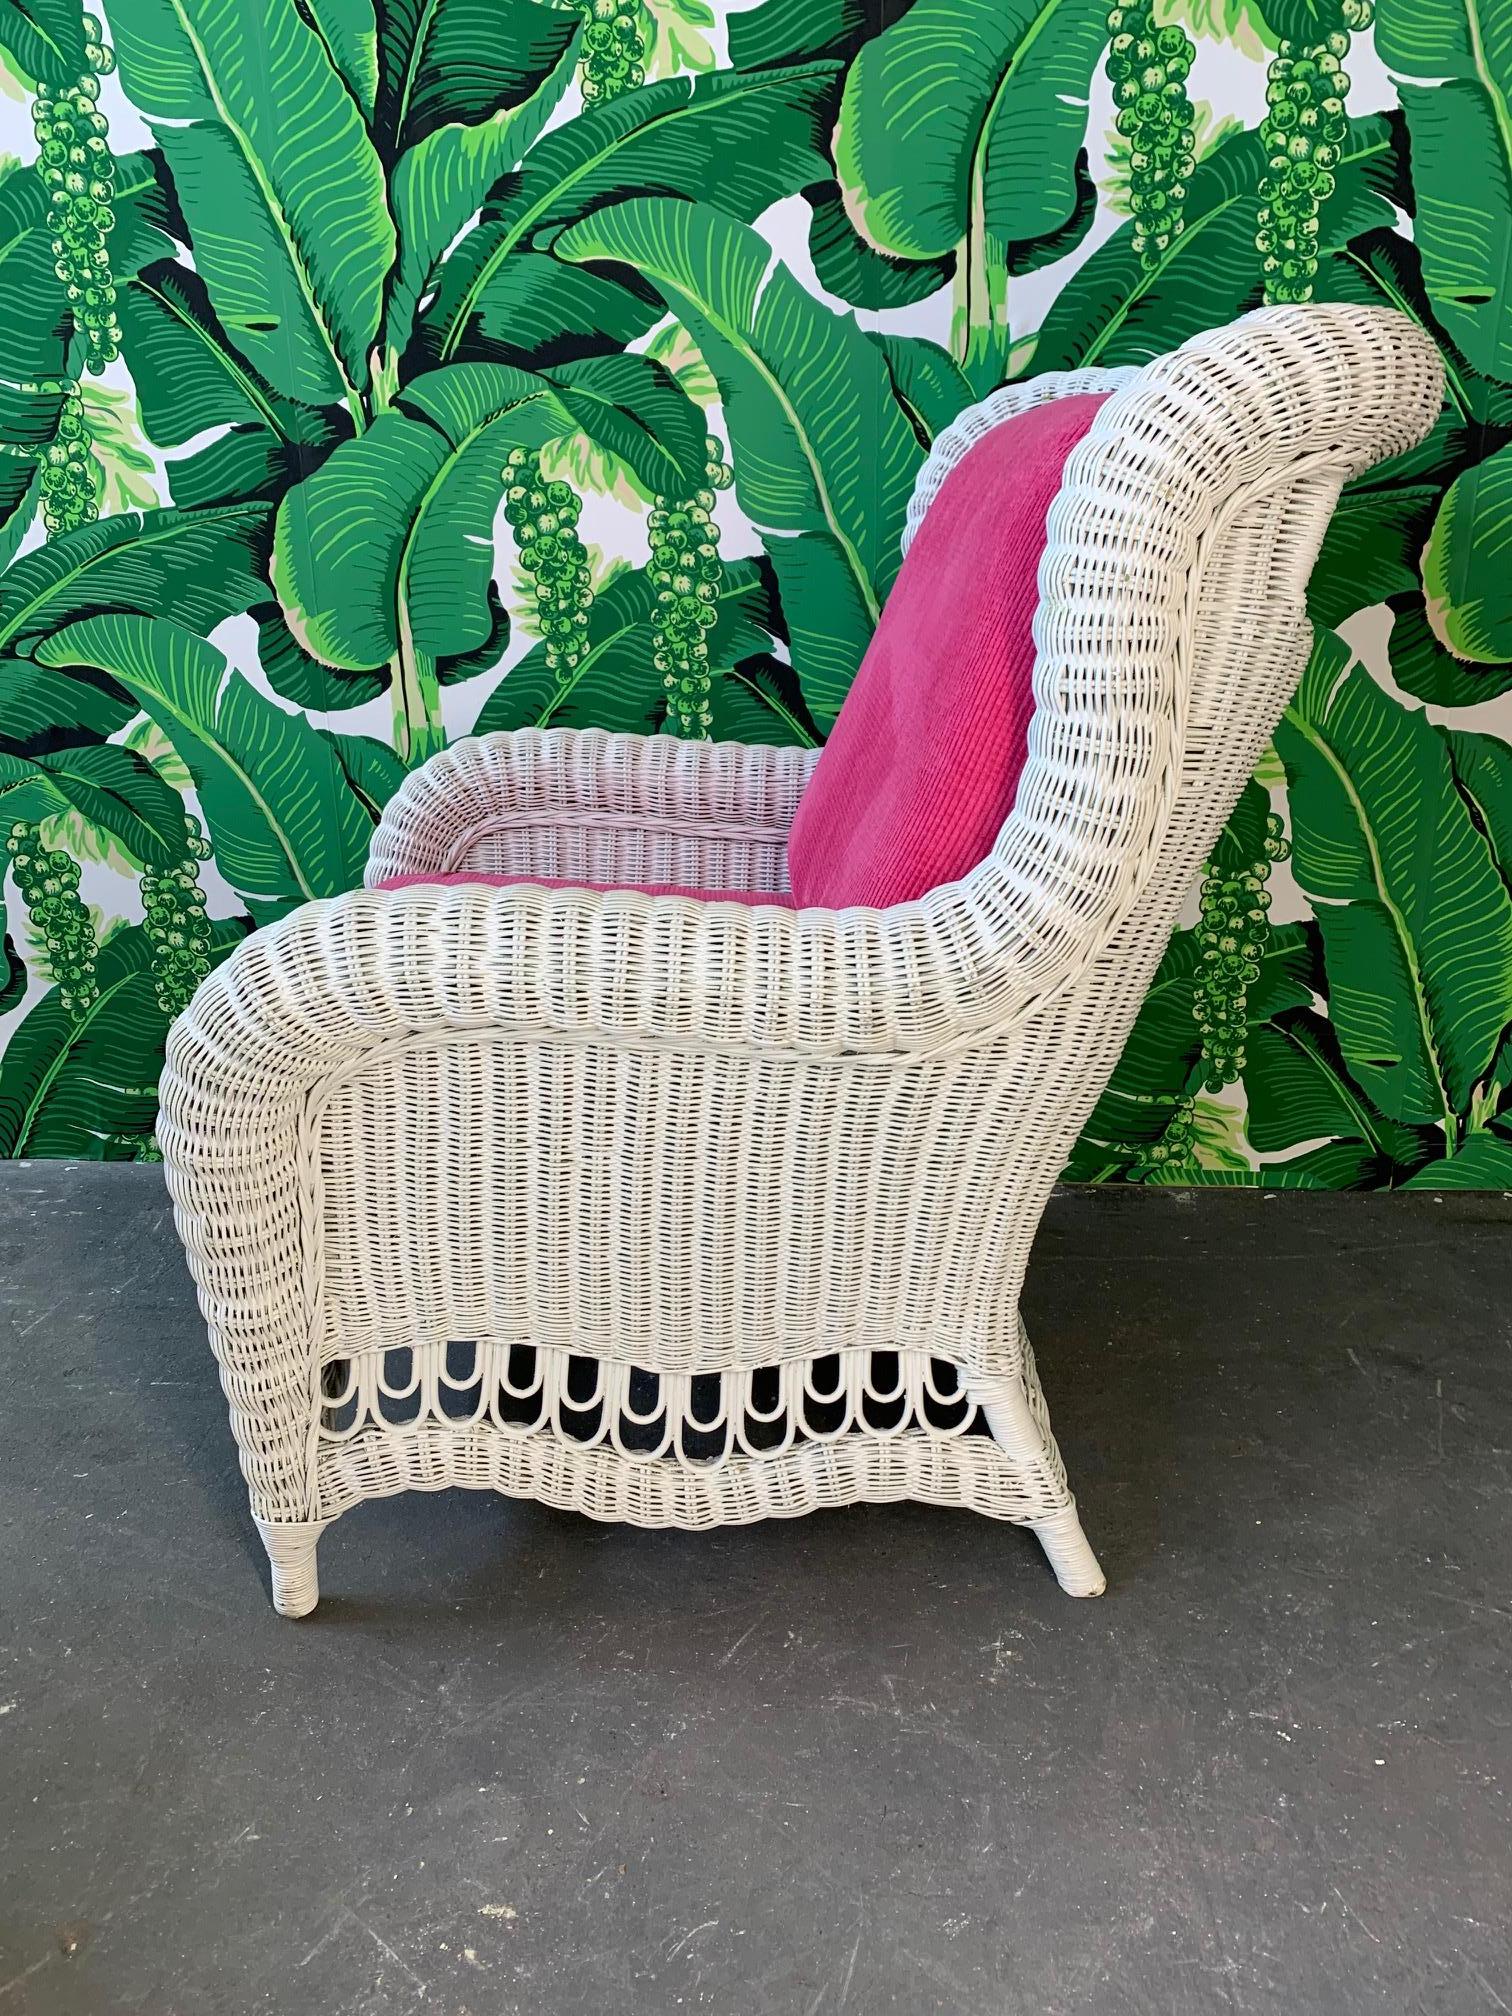 Vintage wicker wingback chair with matching ottoman features cheery pink chenille upholstery. Excellent vintage condition with minor imperfections to finish. Structurally sound.